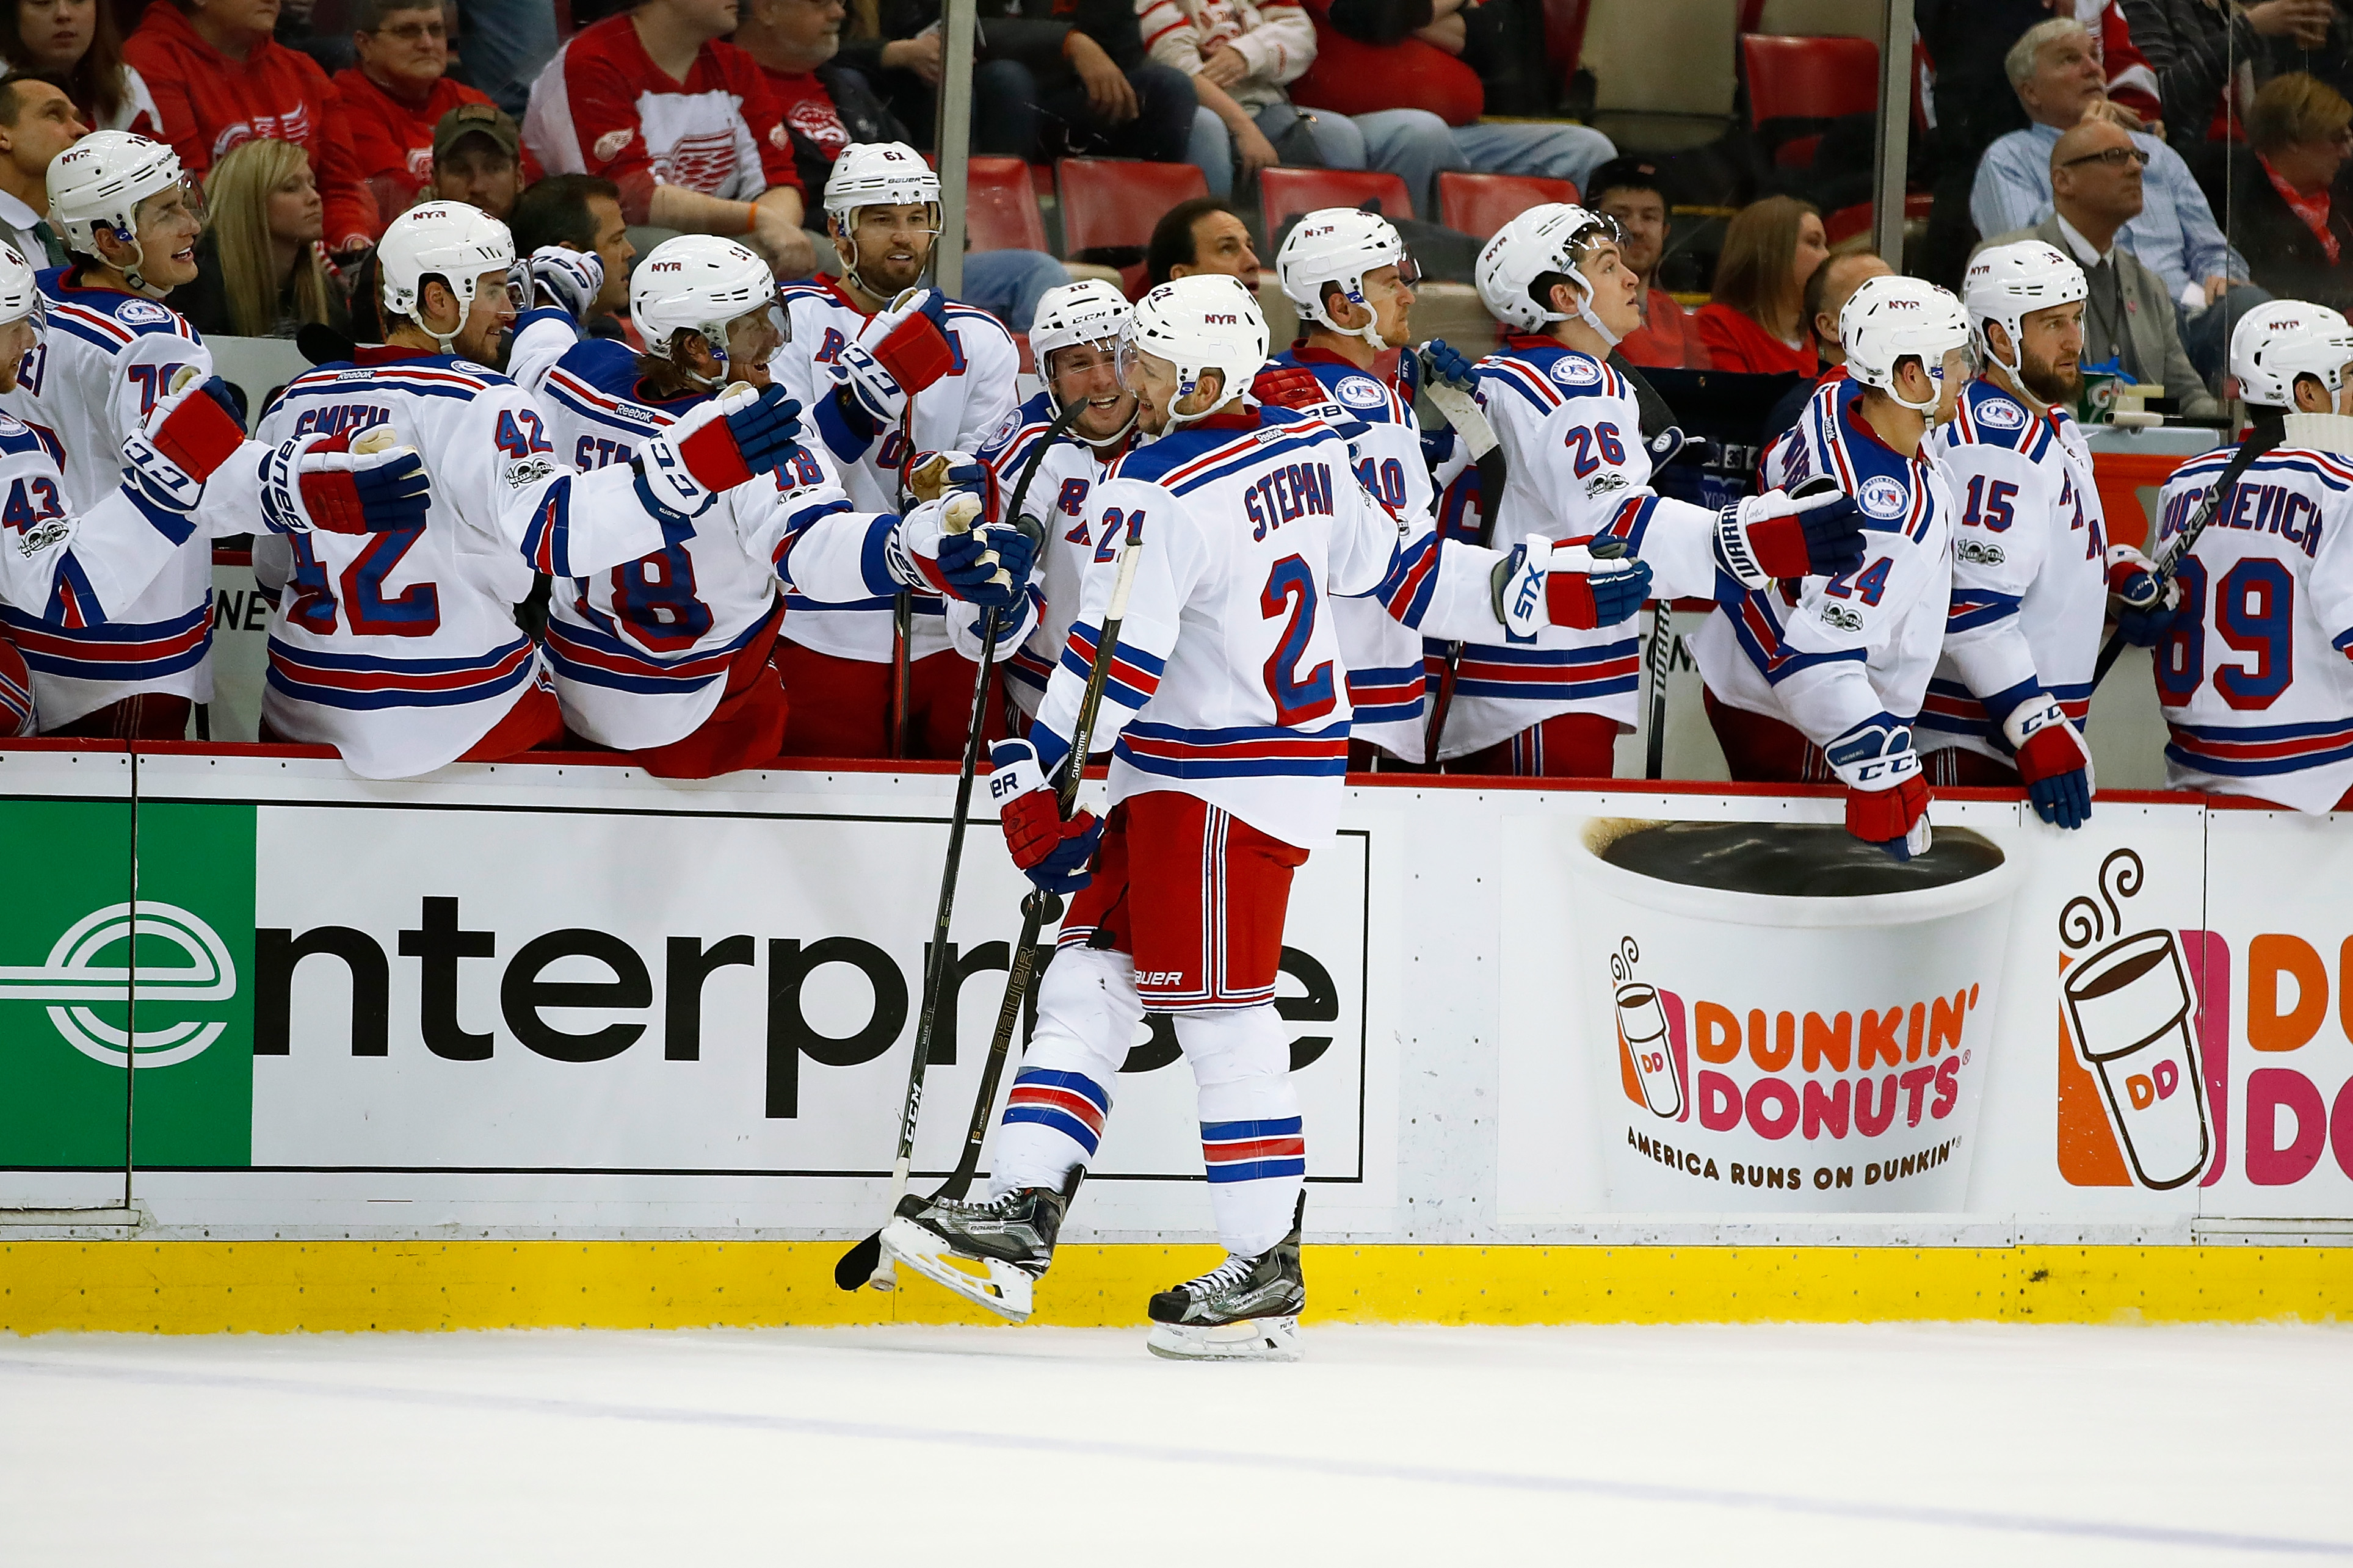 DETROIT, MI - MARCH 12: Derek Stepan #21 of the New York Rangers celebrates a third period power play goal with teammates while playing the Detroit Red Wings at Joe Louis Arena on March 12, 2017 in Detroit, Michigan. New York won the game 4-1. (Photo by Gregory Shamus/Getty Images)